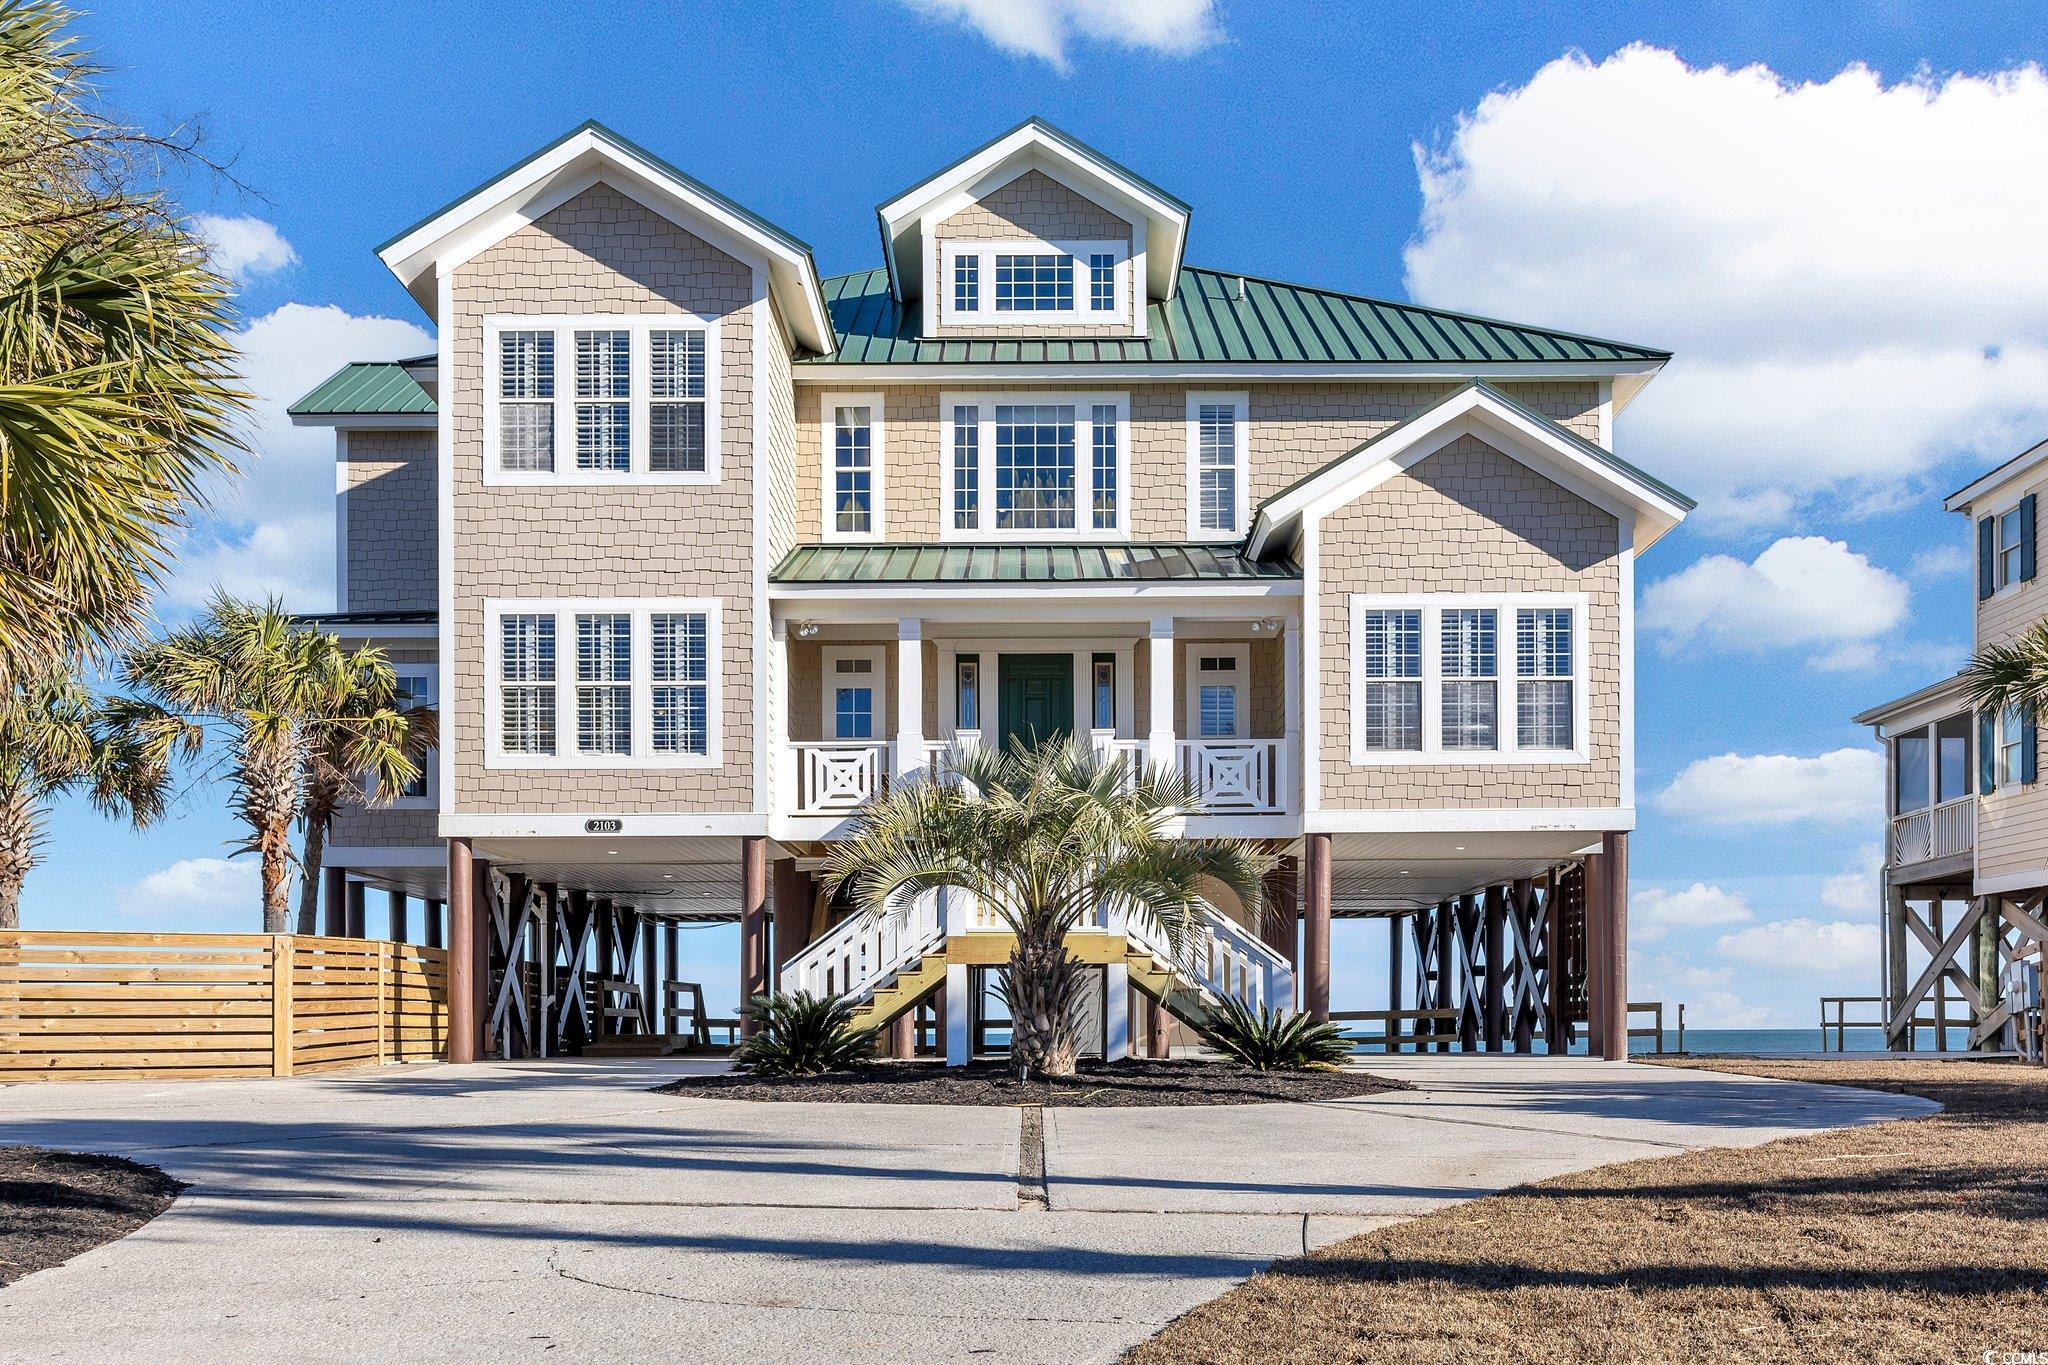 welcome to your luxurious investment opportunity in the heart of murrells inlet, sc! this stunning oceanfront property, known as "caesar's palace", offers the perfect blend of elegance, comfort, proximity, tranquility, and profitability, making it an exceptional addition to any investment portfolio. situated in a prestigious 24/7 gated community, this expansive 8-bedroom, 8.5-bathroom home boasts unparalleled views of the sparkling atlantic ocean. step inside to discover a meticulously designed interior featuring spacious living areas, high-end finishes, and an abundance of natural light. the gourmet kitchen is a chef's dream, equipped with top-of-the-line appliances, granite countertops, and a stylish breakfast bar. the open-concept layout seamlessly transitions into the dining and living areas, creating the ideal space for entertaining guests or relaxing with family and friends. outdoor living is elevated to new heights with a private in-ground pool and spillover spa, perfect for cooling off on hot summer days or enjoying crisp, cool nights. an outdoor kitchen, complete with a grill and bar area, are ideal for entertaining while taking in the breathtaking ocean views. this investment property is a lucrative opportunity, with exceptional occupancy. whether you're looking for a vacation rental property or a long-term investment, this home offers the potential for substantial returns. additional features include an elevator for convenient access to all levels of the home, ensuring accessibility for all guests and a loft area presently serving as a game room. with its prime location, luxurious amenities, and impressive earning potential, this oceanfront investment property is a rare find that won't last long. don't miss out on the opportunity to own a piece of paradise in murrells inlet, sc. schedule your private showing today and discover the endless possibilities awaiting you at this remarkable investment property.  all measurements are approximate and should be verified by buyer.